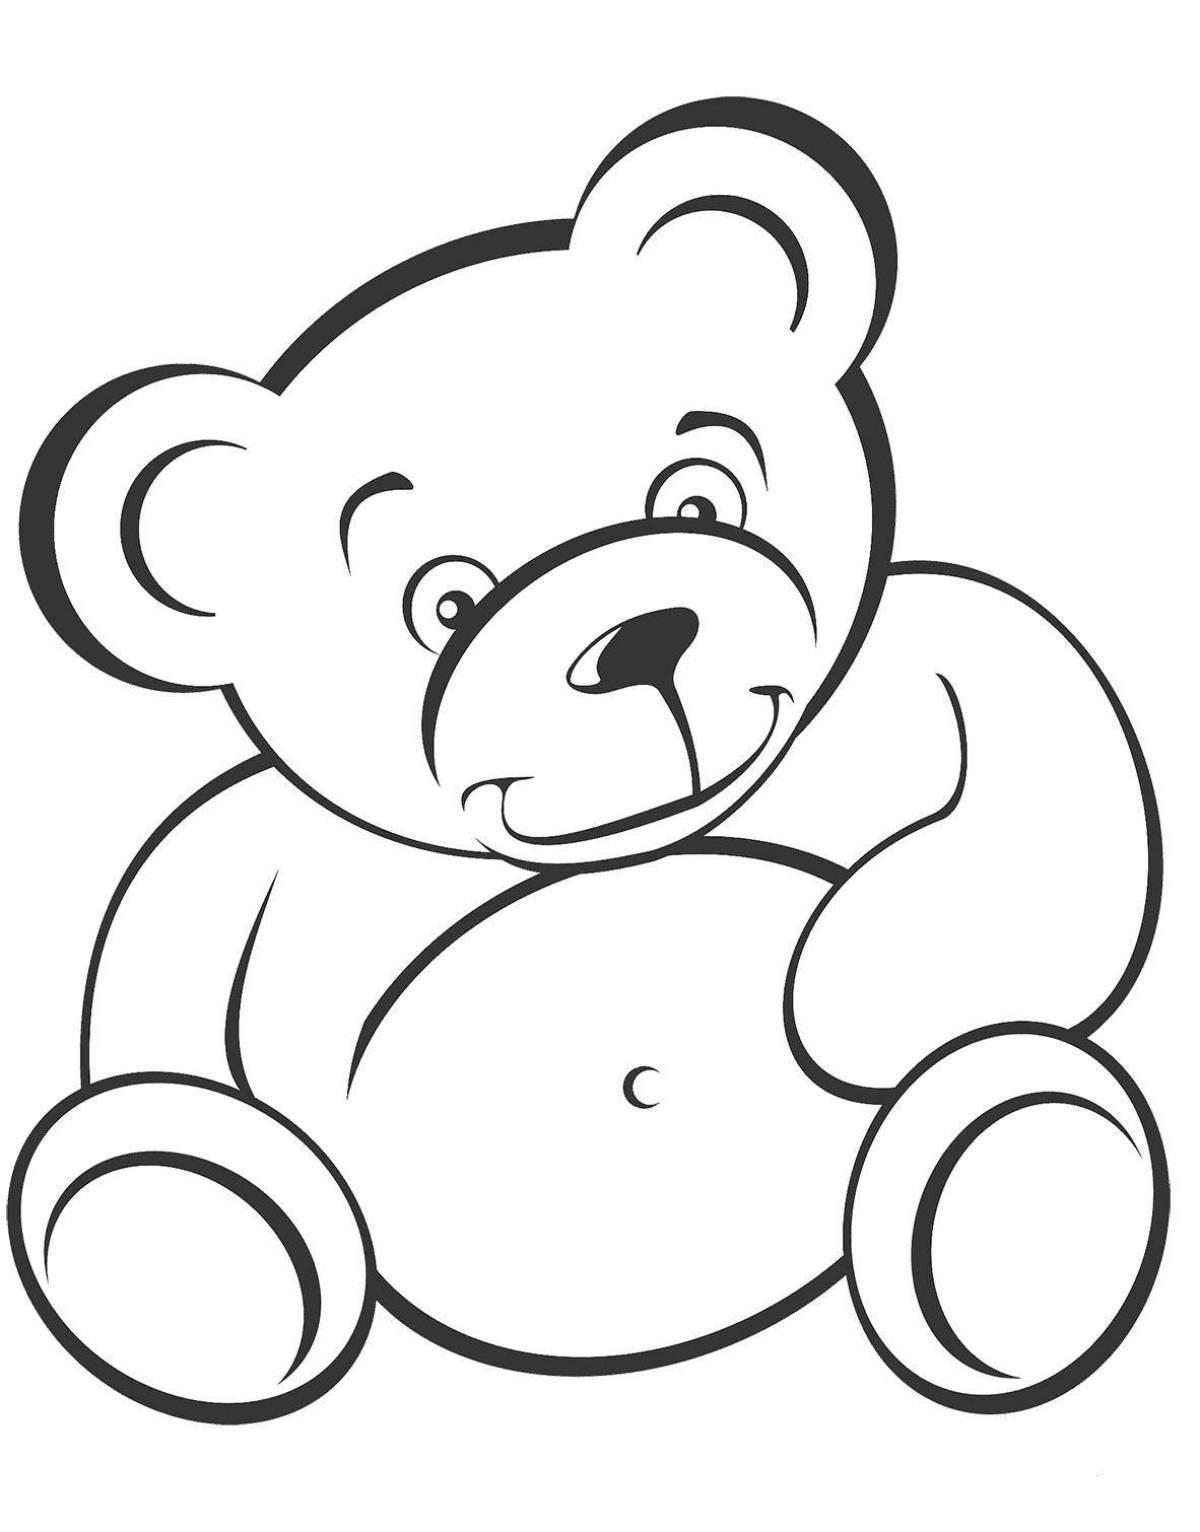 Great teddy bear coloring book for 5-6 year olds